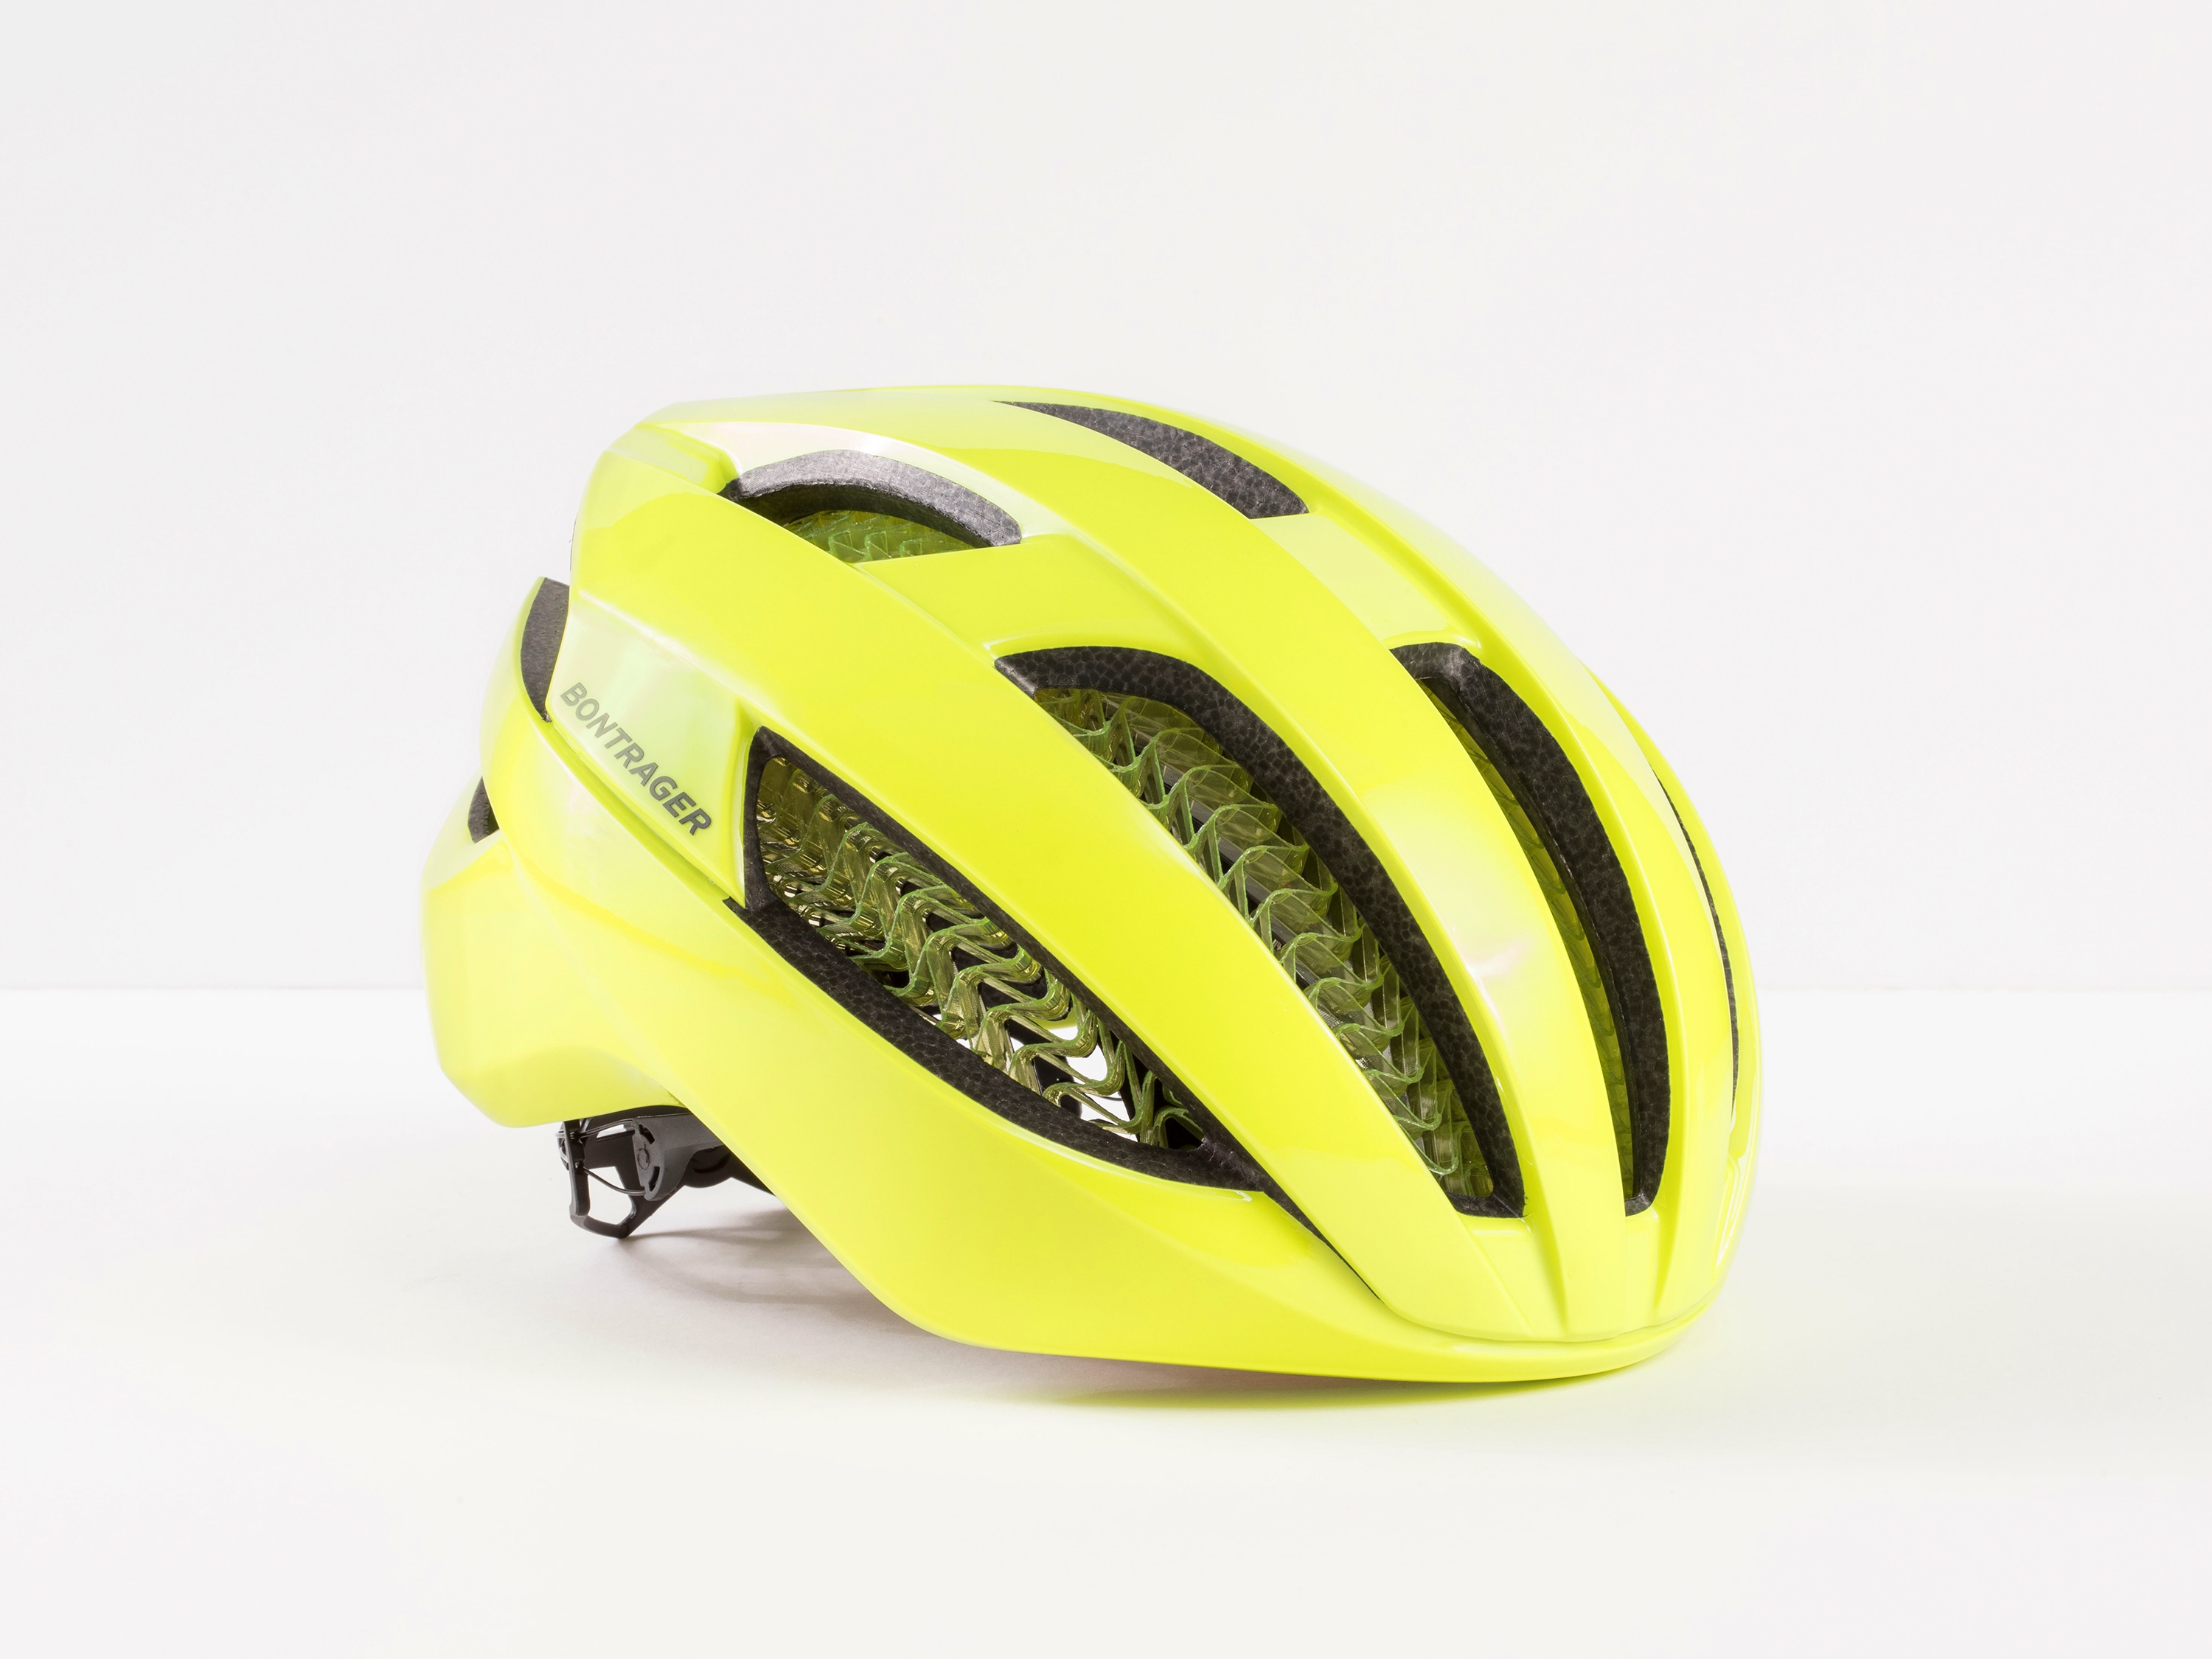 <a href="https://cycles-clement.be/product/casque-bont-specter-wavecel-small-radioactive-y/">CASQUE BONT SPECTER WAVECEL SMALL RADIOACTIVE Y</a>